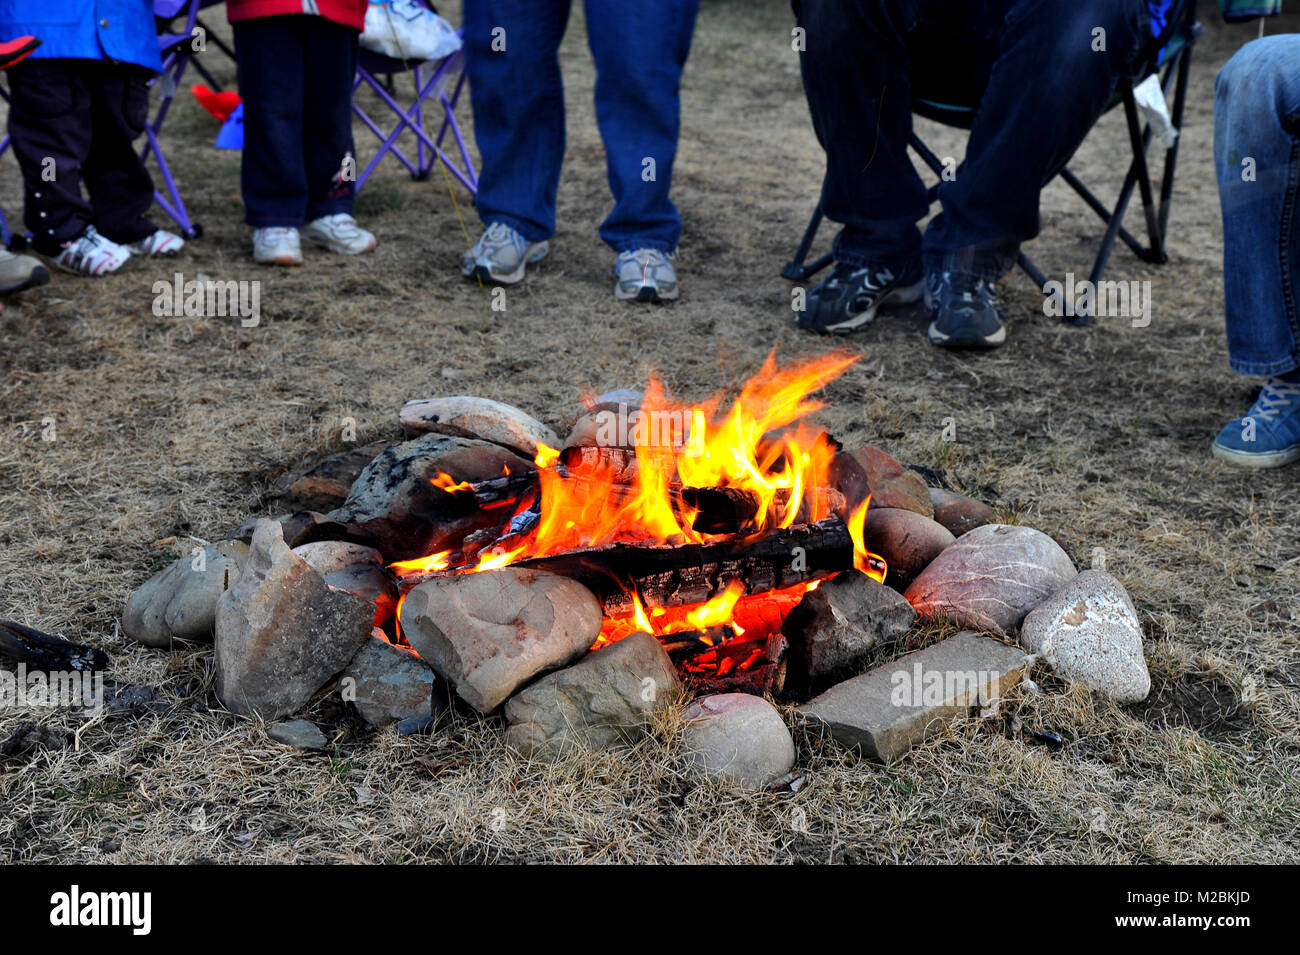 A camp fire in the safety of a stone circle with people gathered around in rural Alberta Canada. Stock Photo